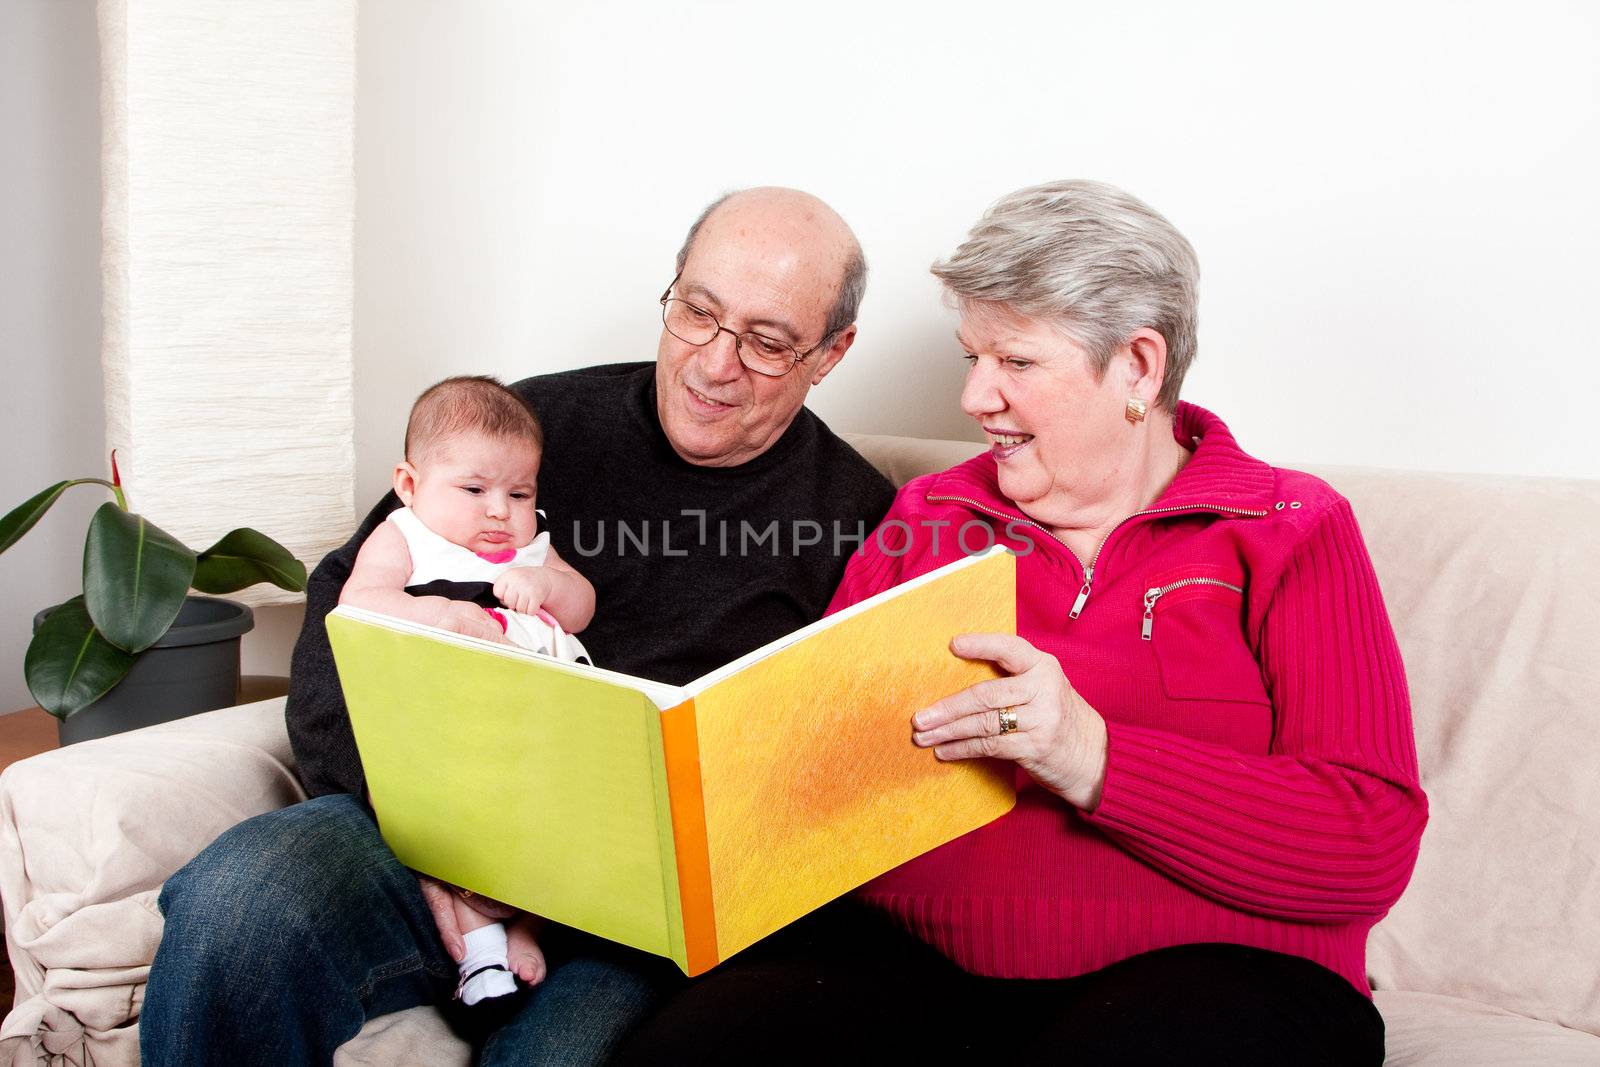 Proud and happy grandparents reading book to educate their grandchild. Baby girl enjoying book while sitting on couch in livingroom.